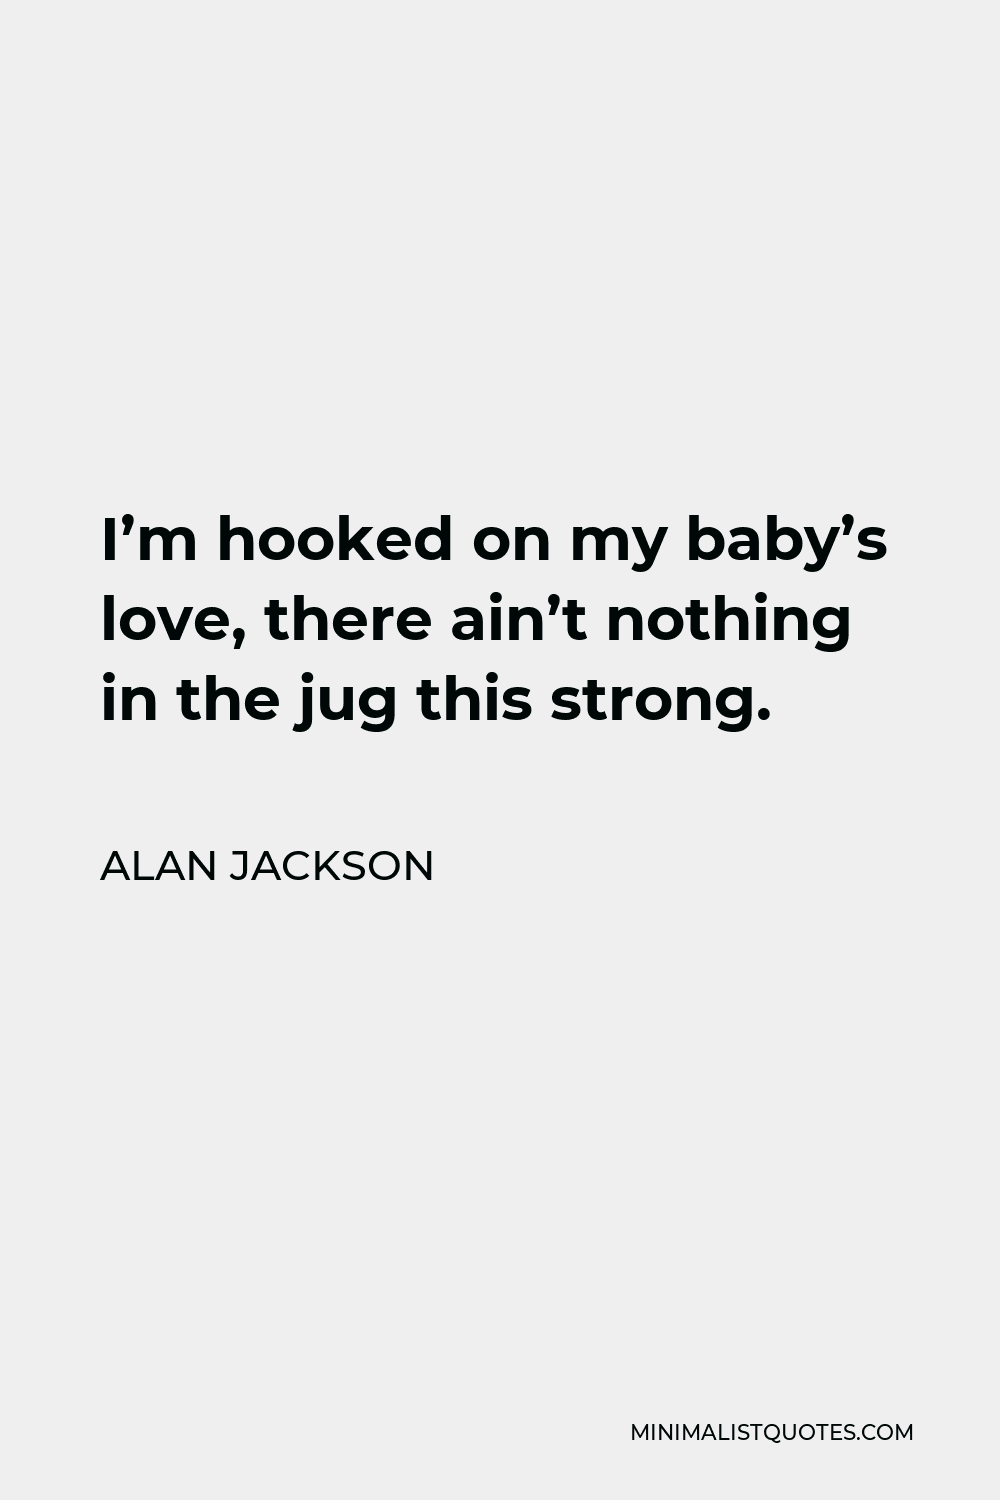 Alan Jackson Quote - I’m hooked on my baby’s love, there ain’t nothing in the jug this strong.